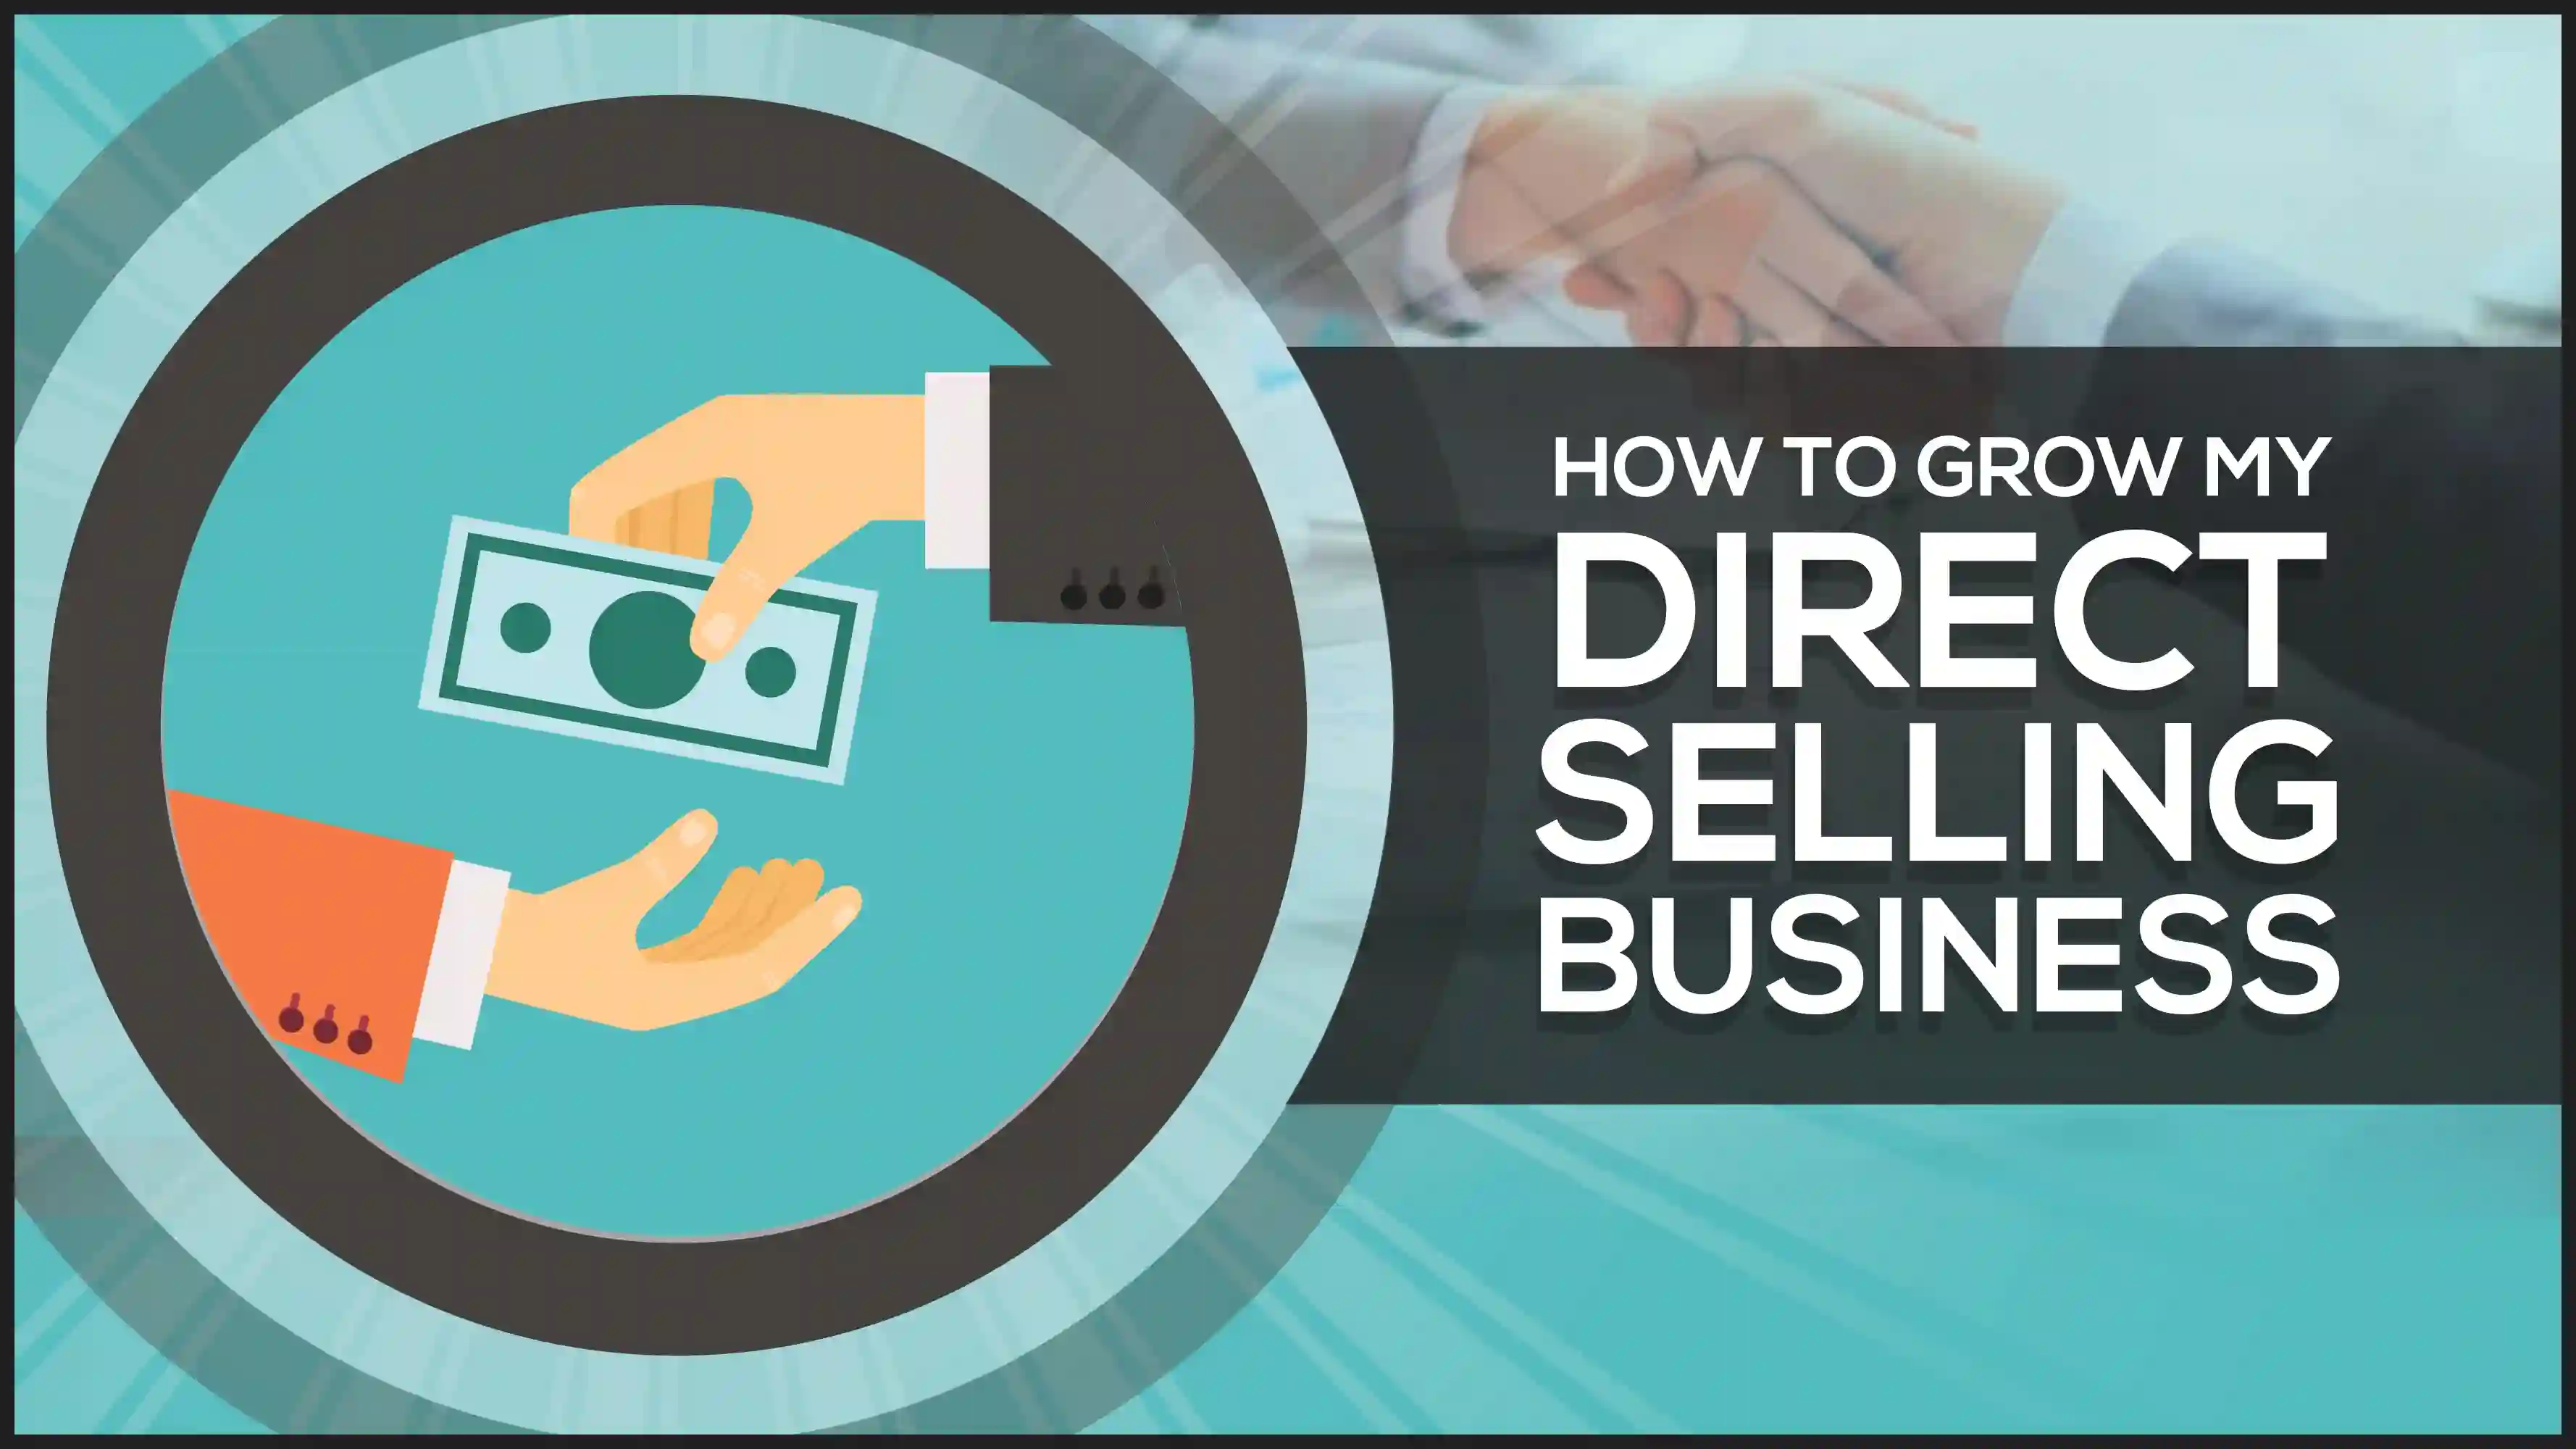 How to grow my direct selling business